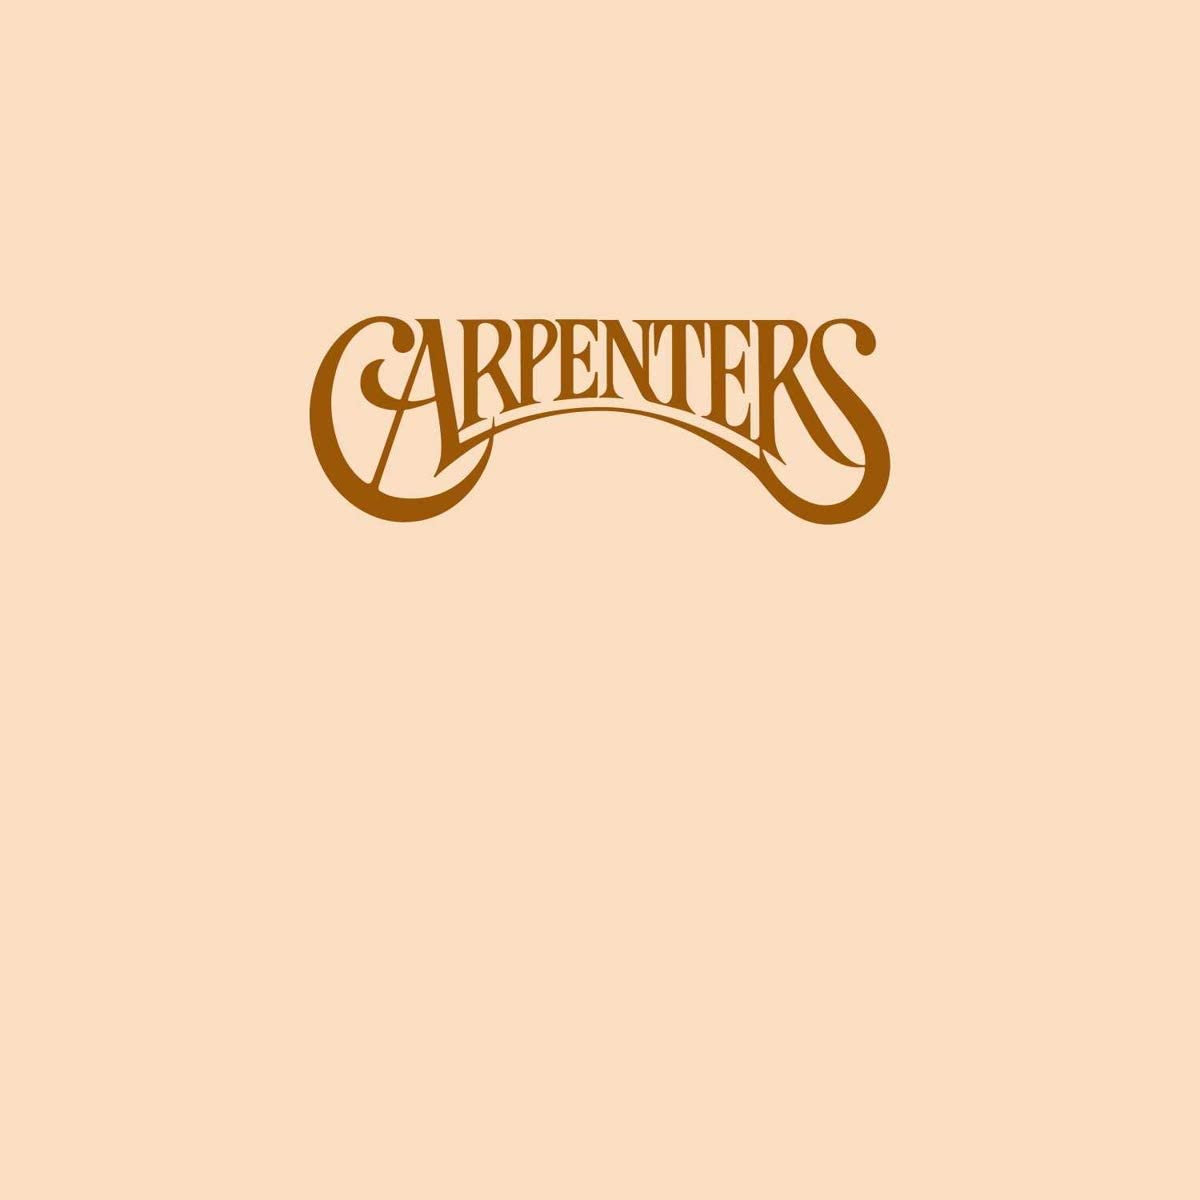 Carpenters is the third studio album on Vinyl from the Carpenters, originally released in 1971.  The record is most notable for two of the duo's strongest and best-loved singles. "Rainy Days and Mondays" and "Superstar."